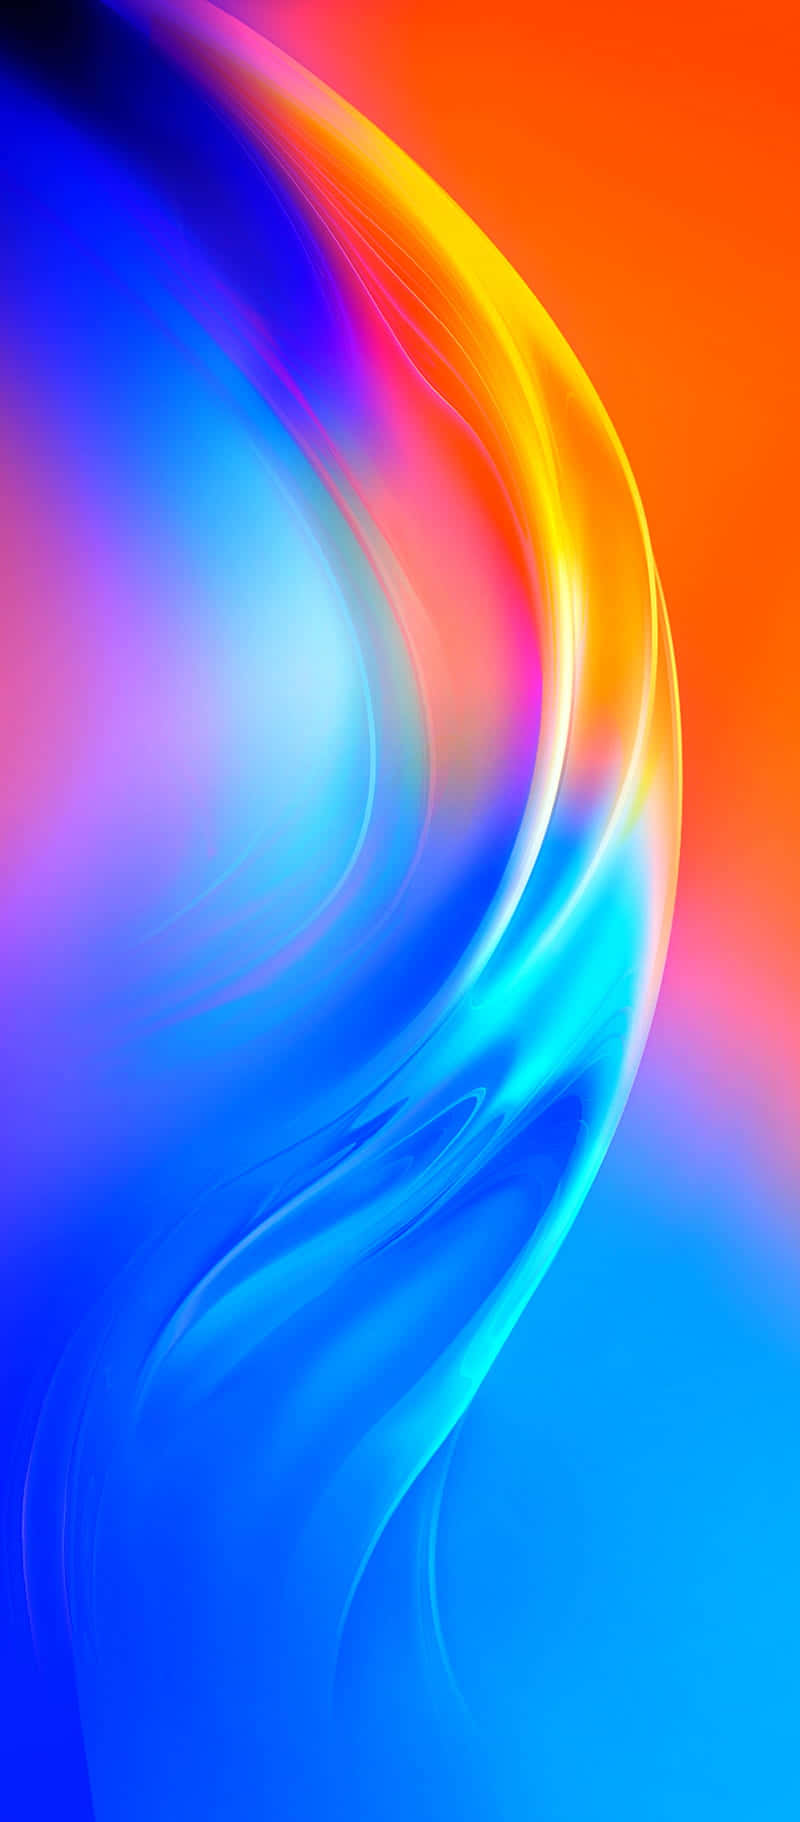 A Colorful Abstract Background With Blue And Orange Colors